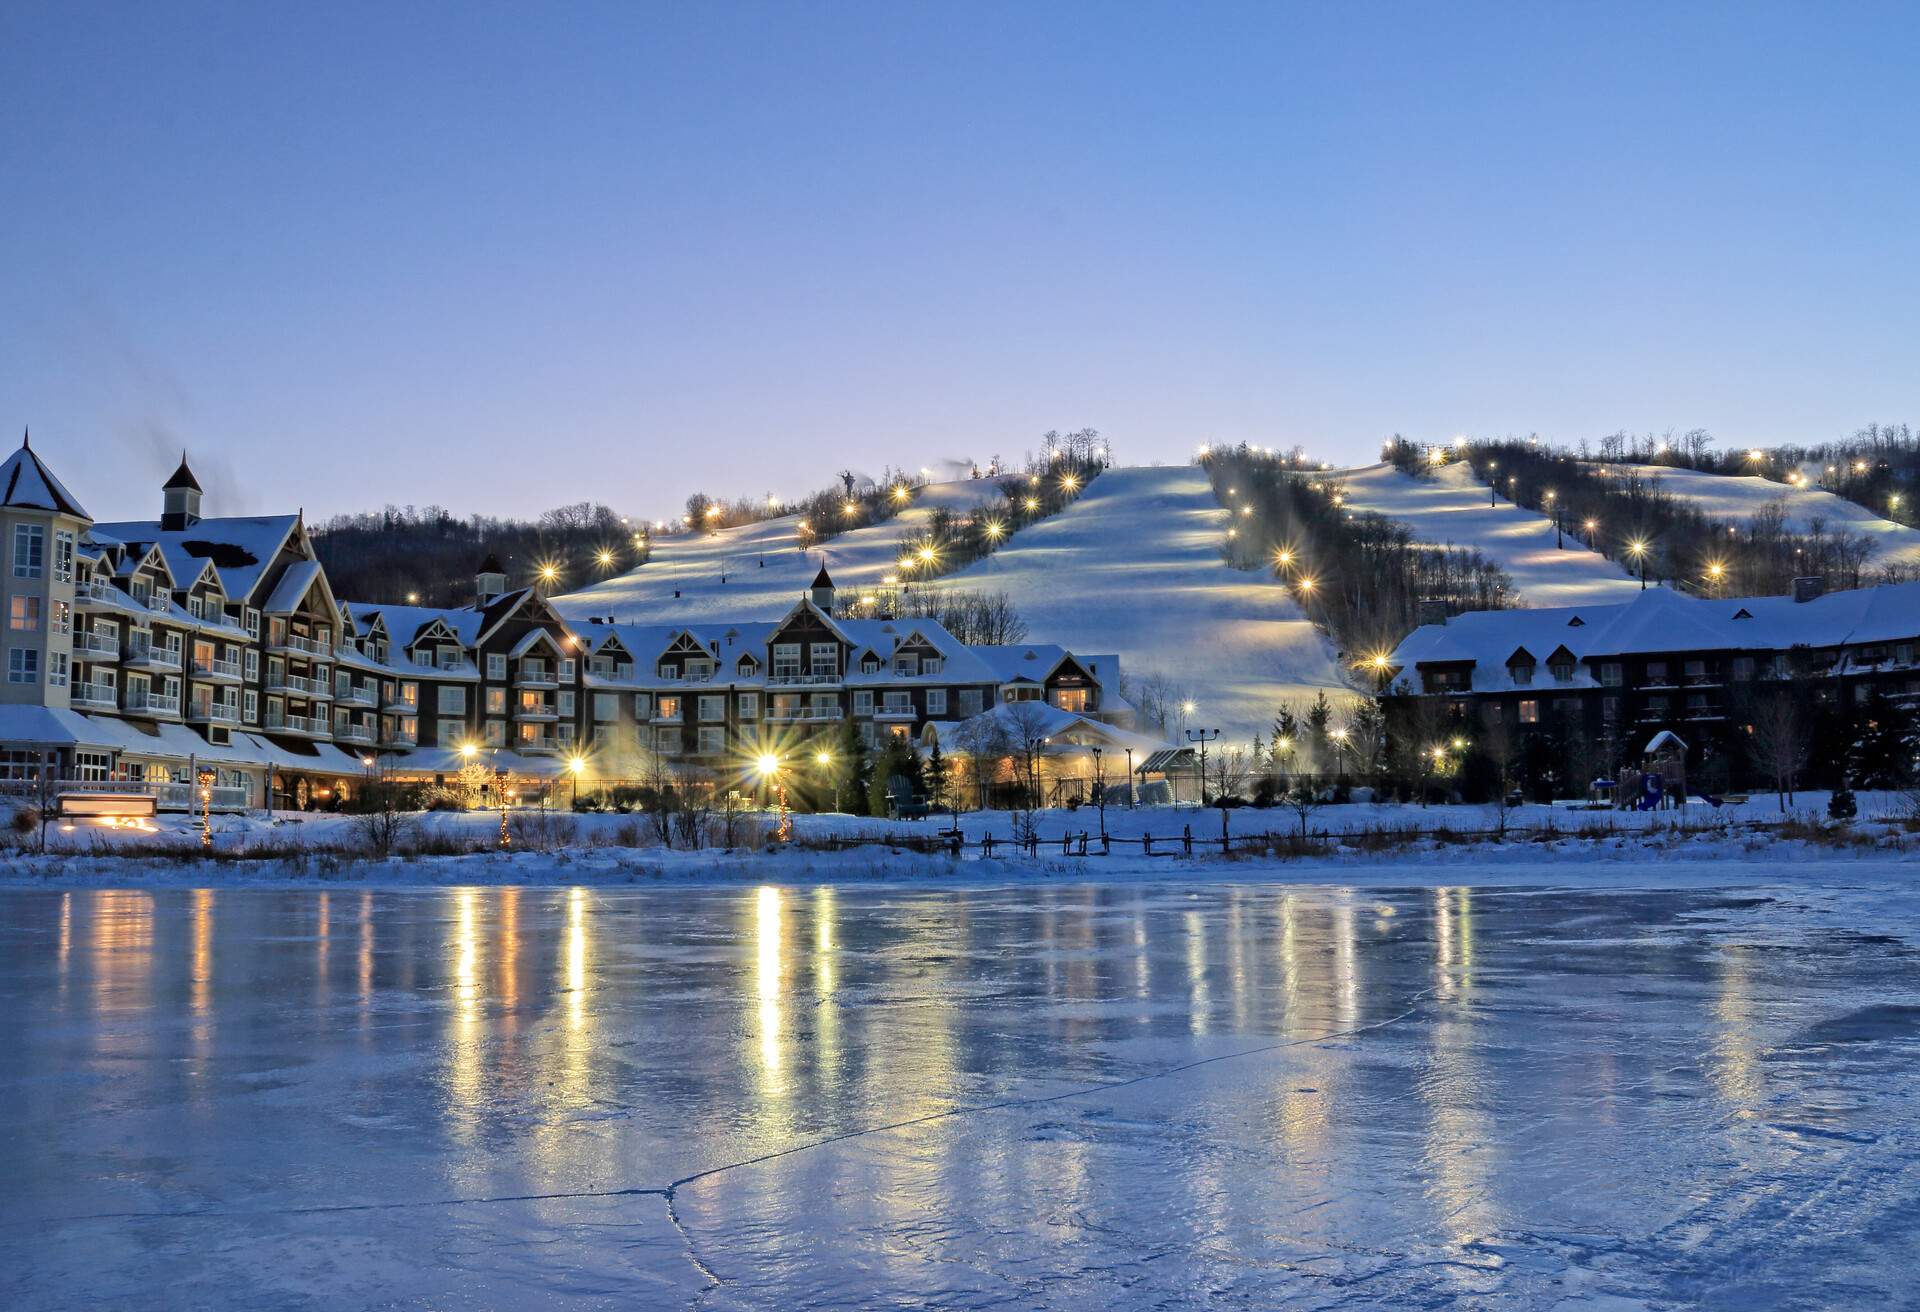 Blue Mountain Village with ski slopes, lodges and spas in the evening